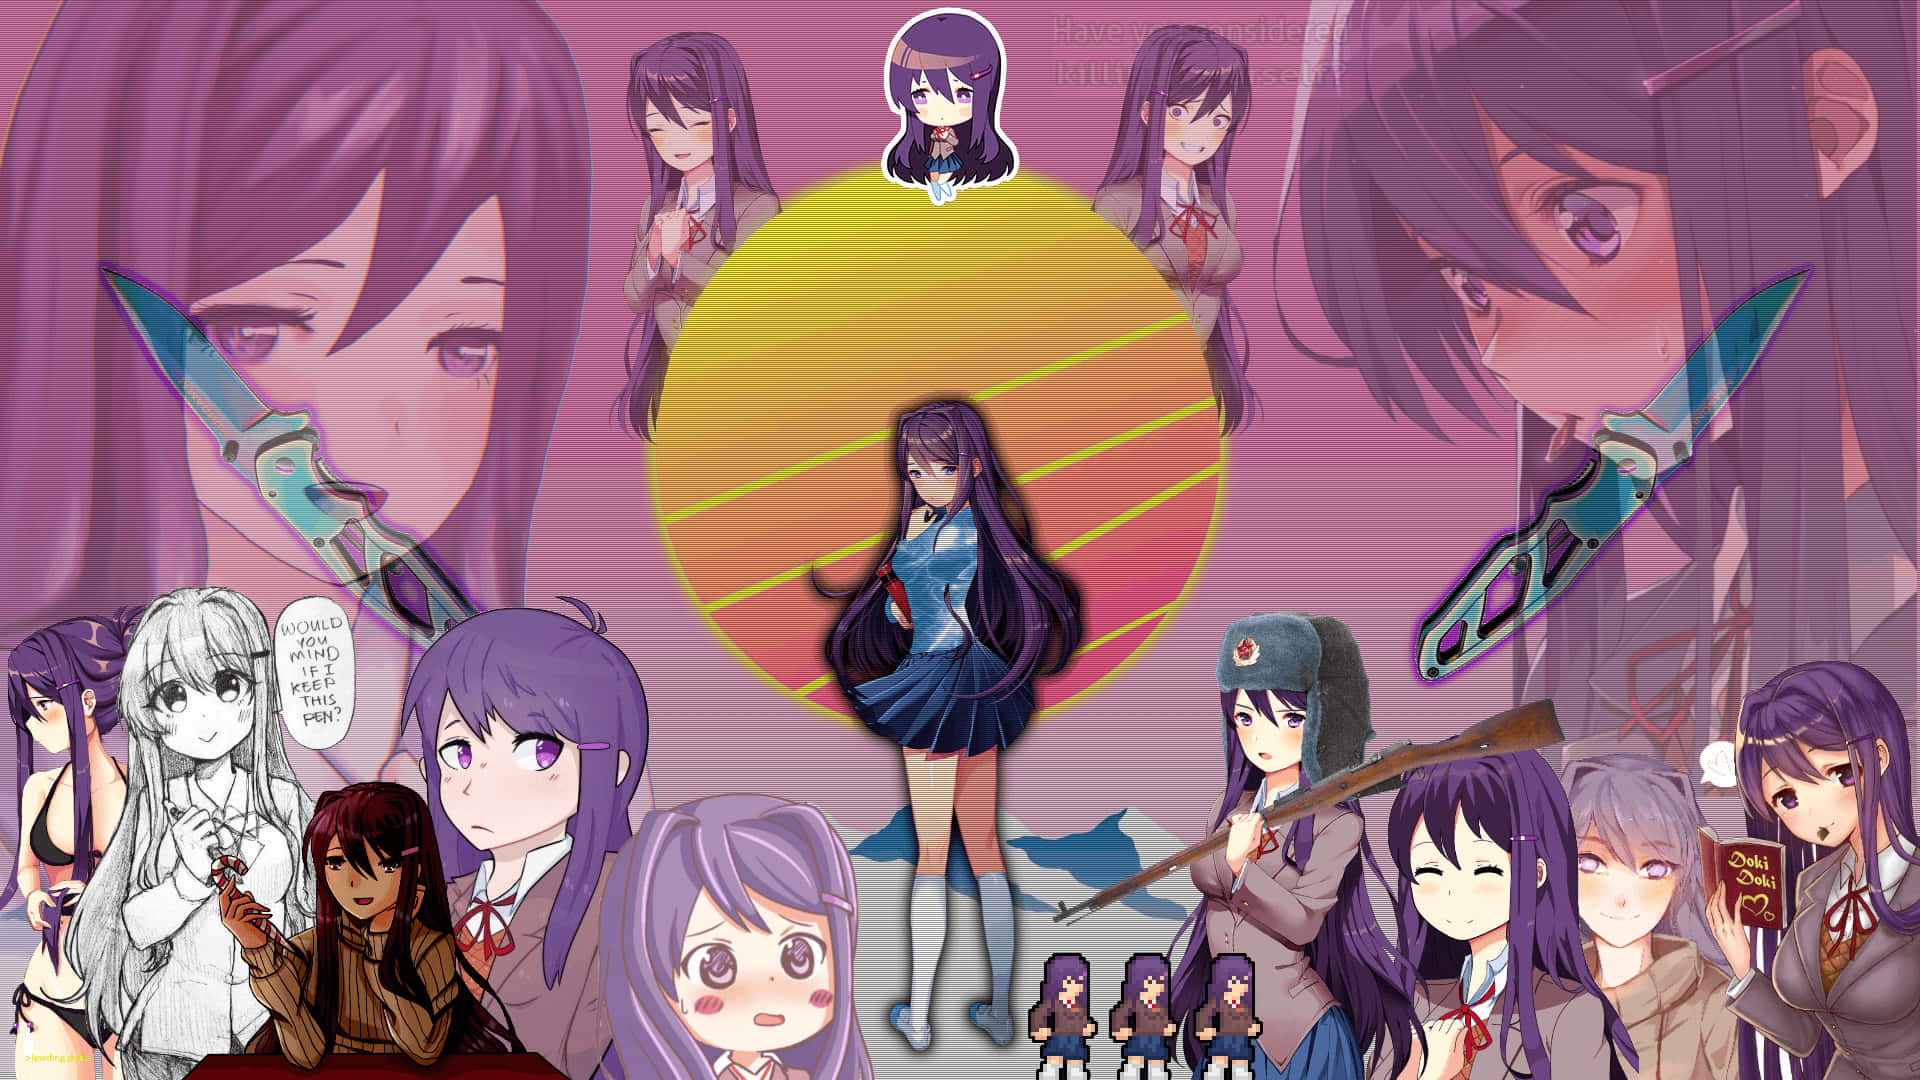 I made a wallpaper for the best girl Yuri Making the other girls soon   rDDLC